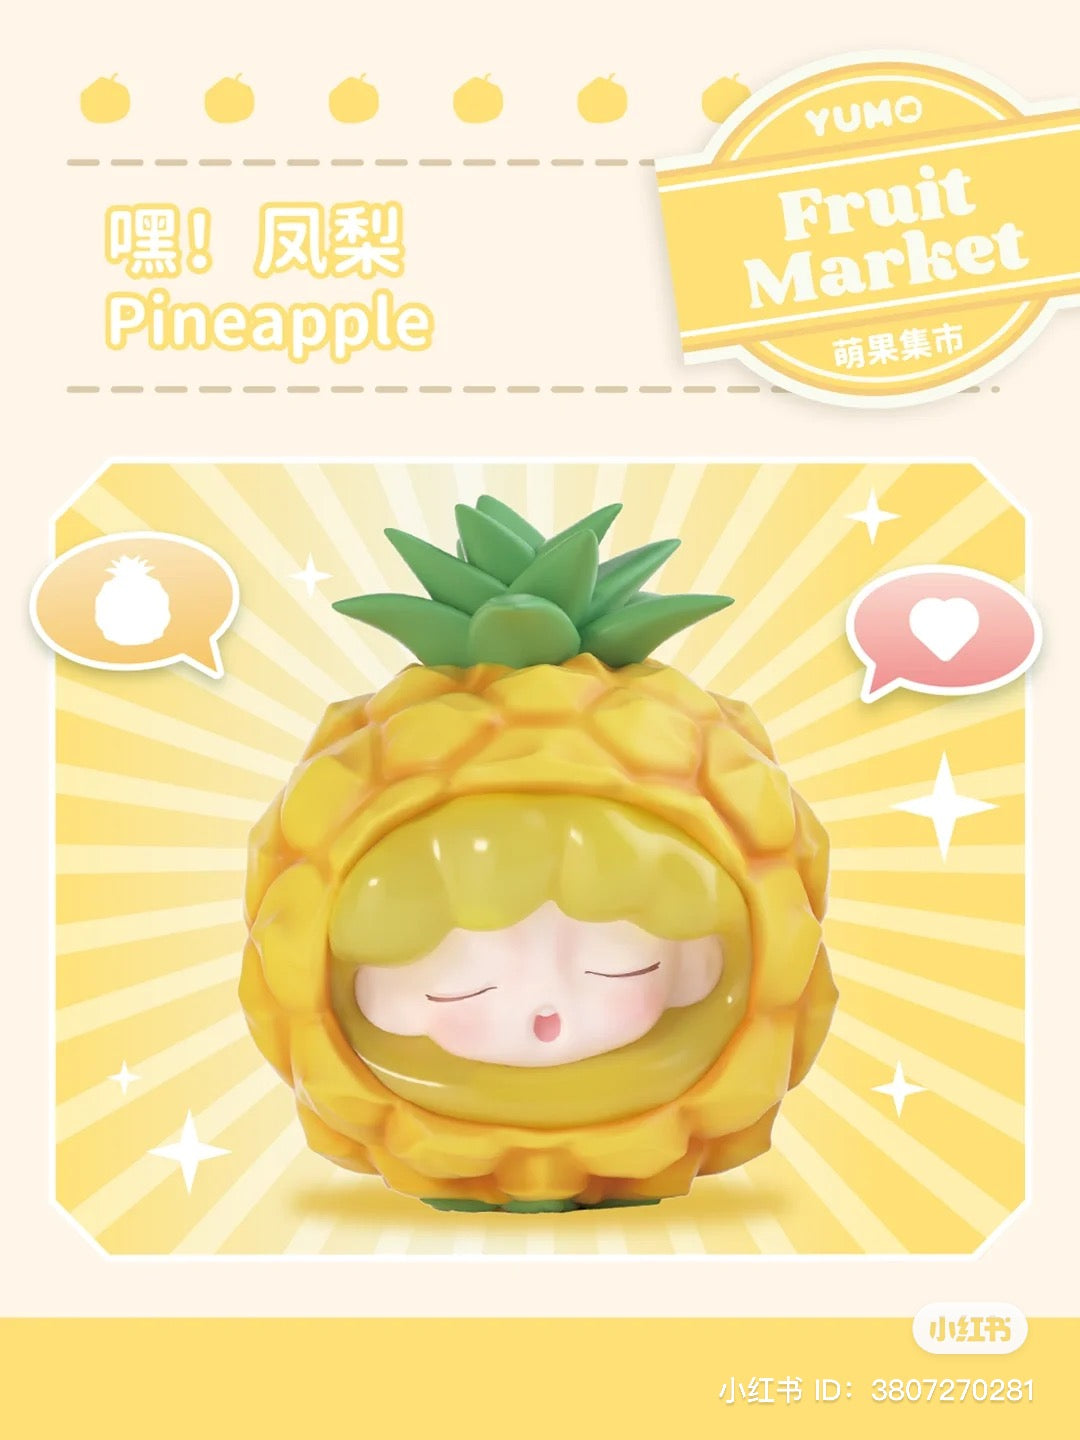 A blind box toy series titled Yumo Fruit Market featuring 12 regular designs and 1 secret. Each box contains 2 different toy designs. Image shows a pineapple-shaped toy with a face, a cartoon face, and a pineapple logo.